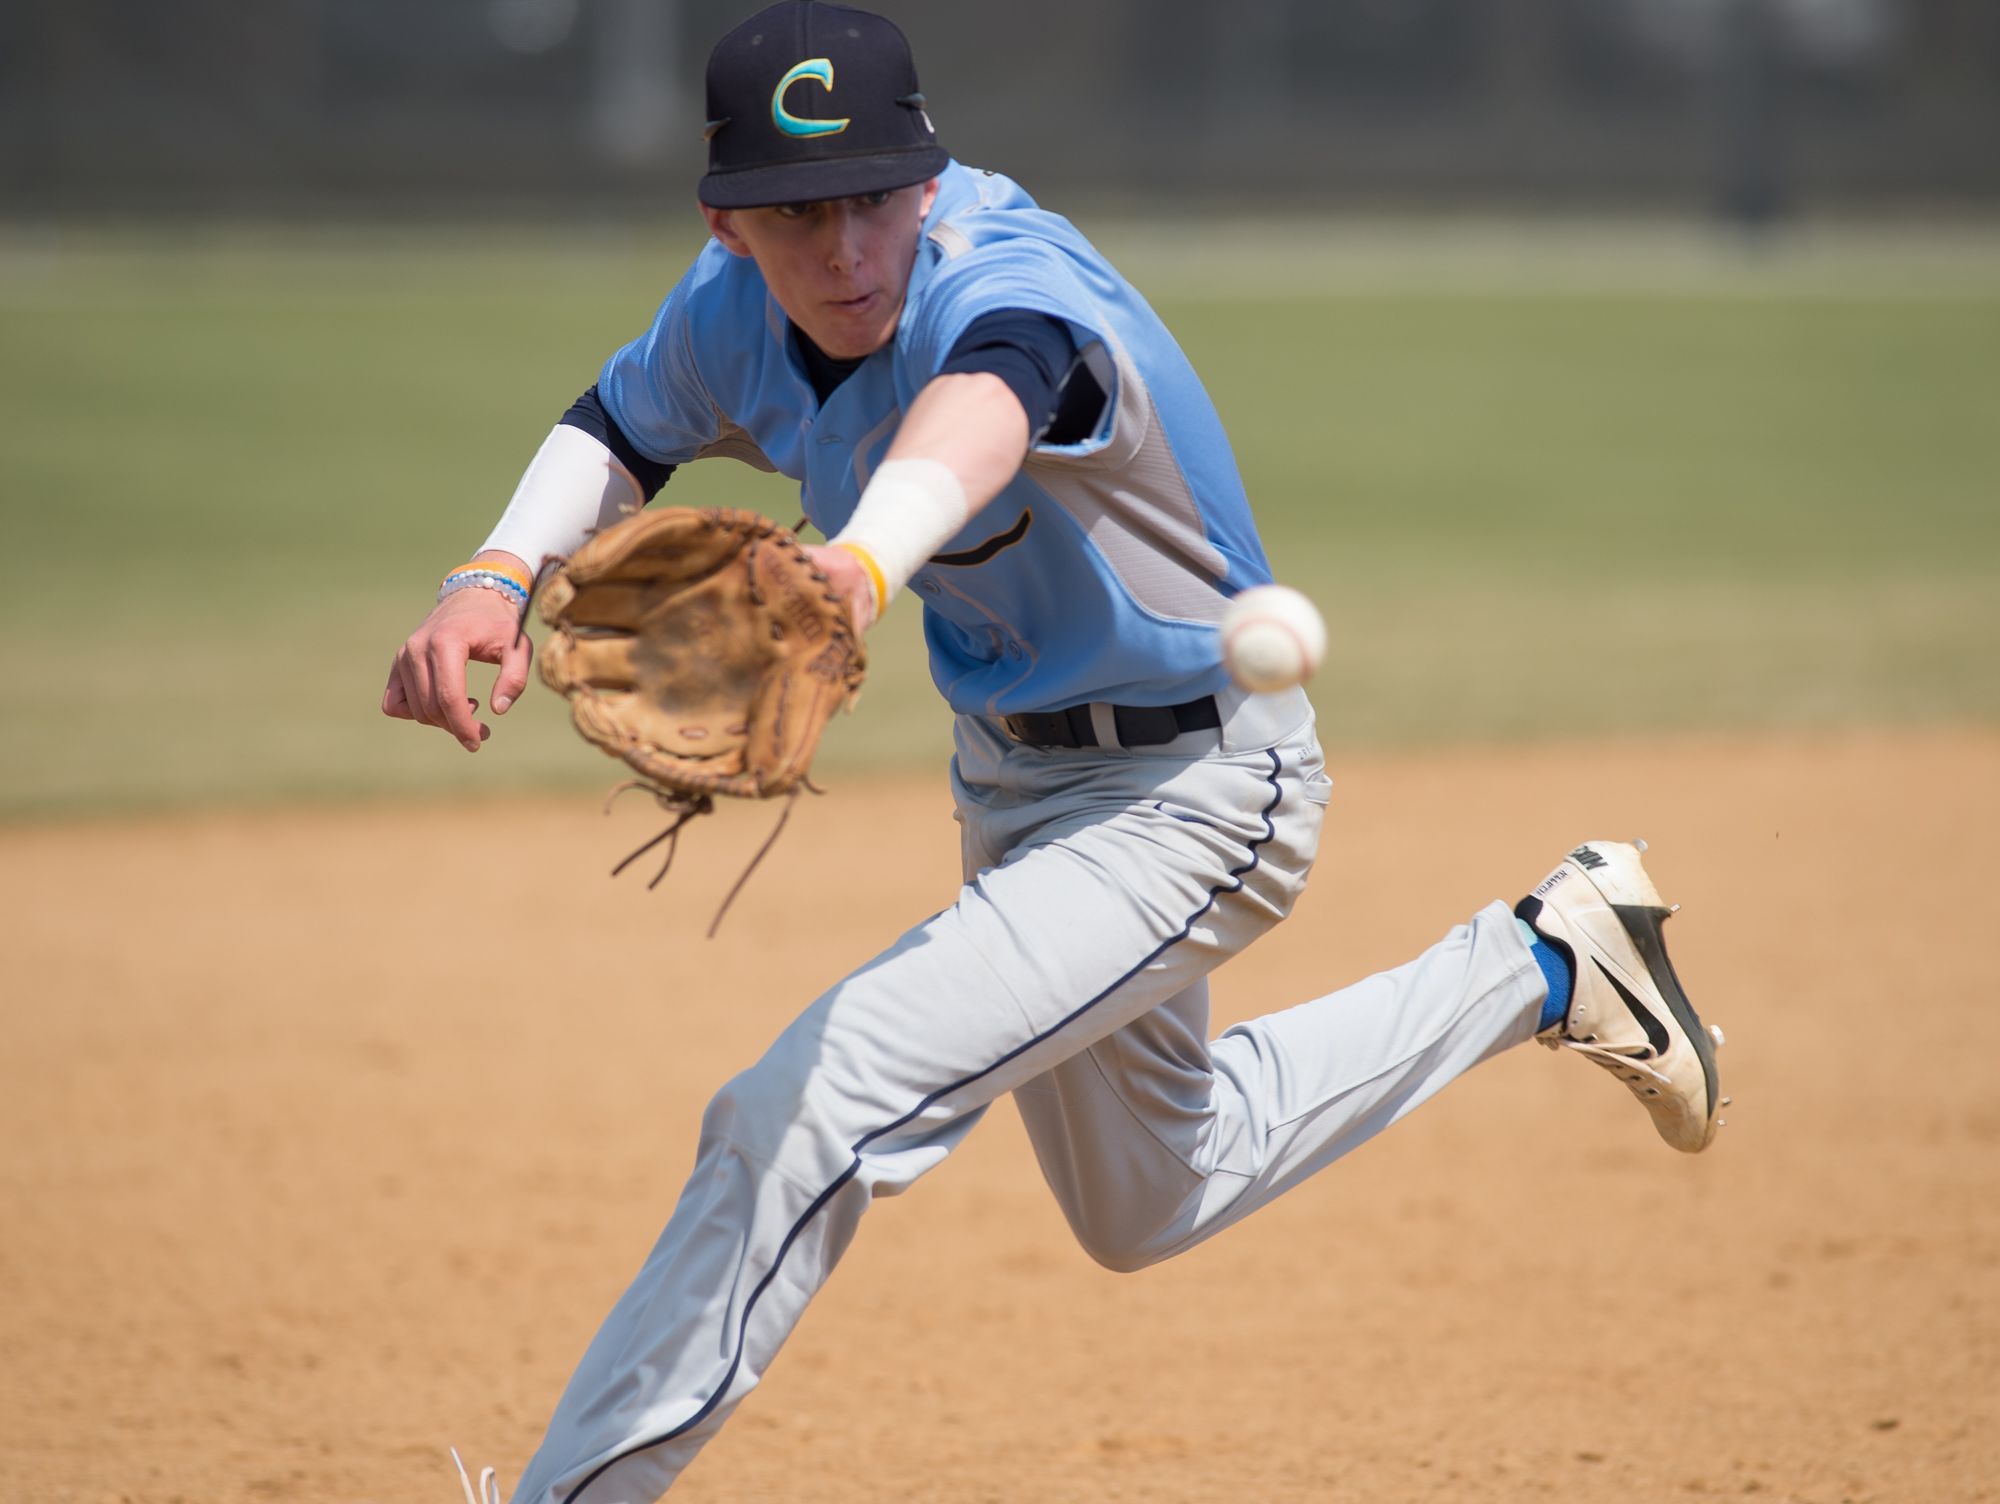 Cape Henlopen’s Zachary Savage (2) catches a ball hit down the third base line in their home game against Caravel.